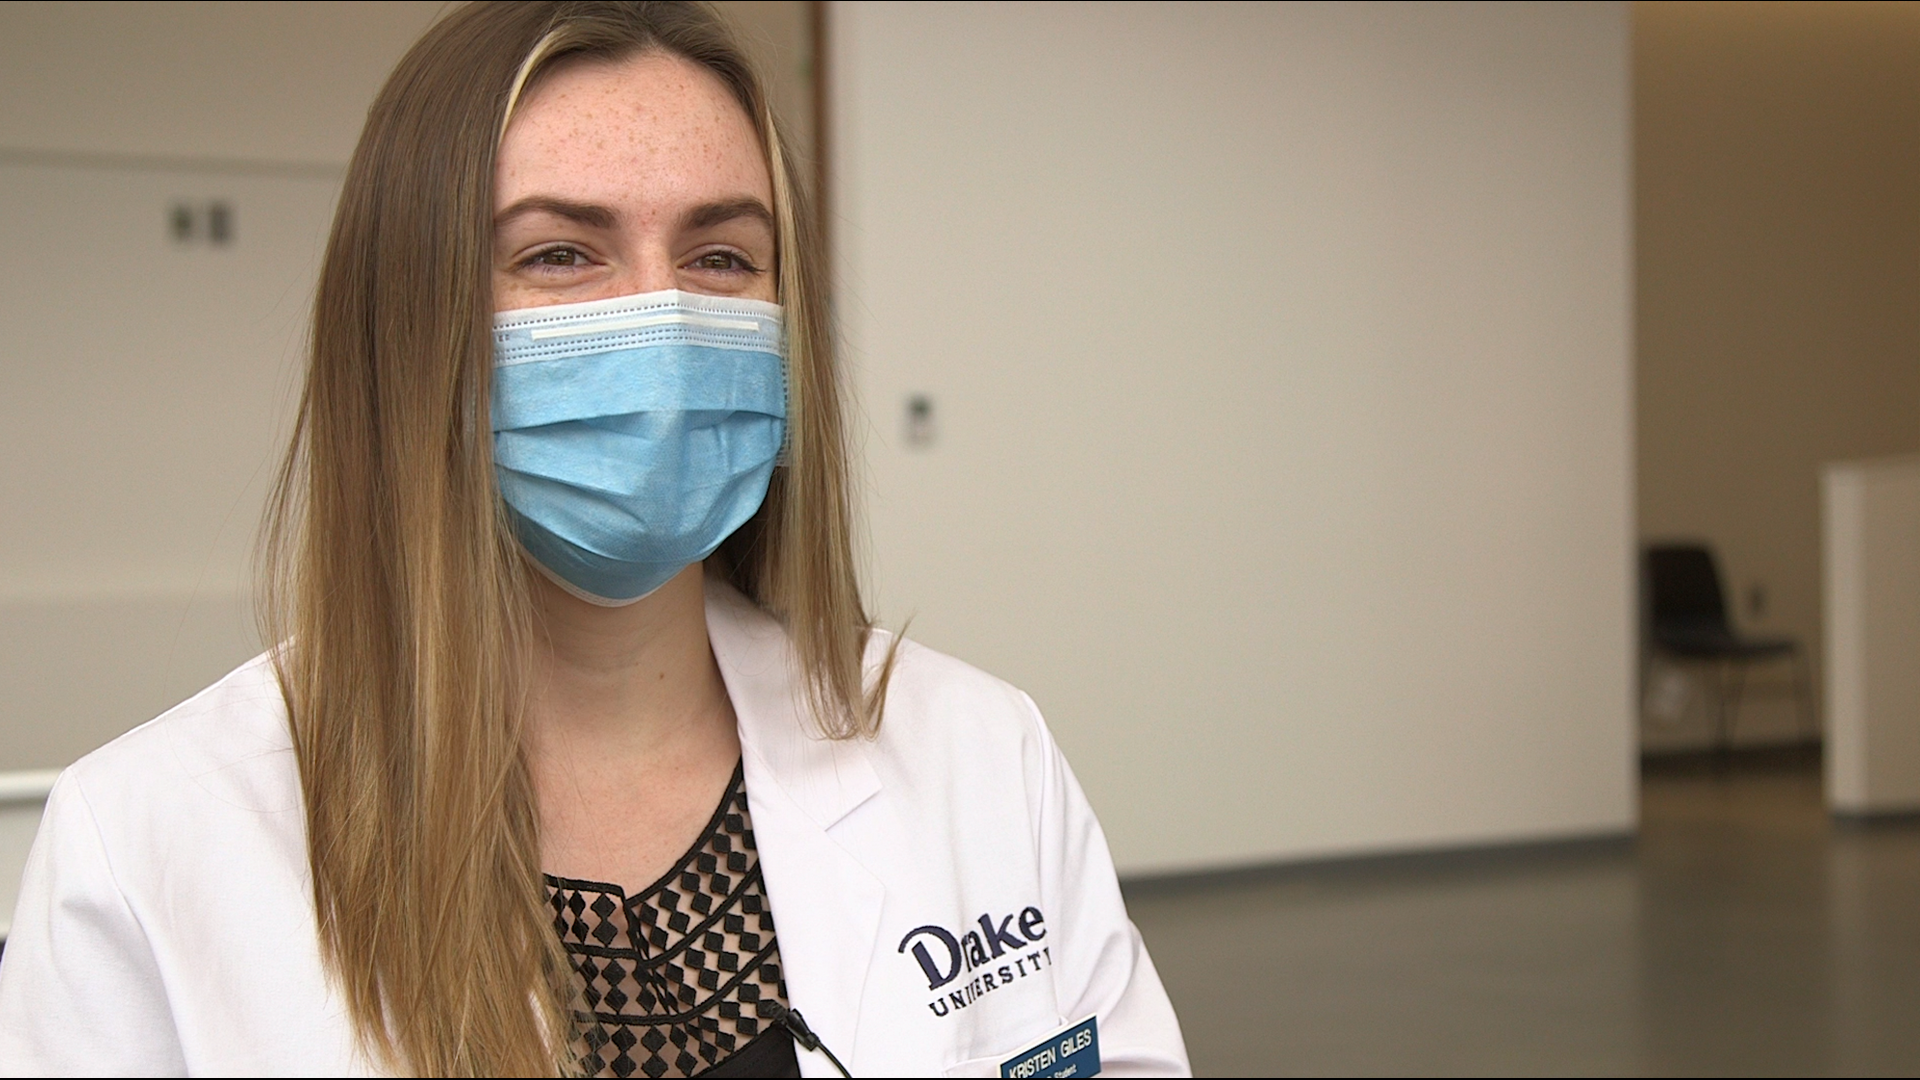 Typically, the immunization certificate is offered in a pharmacy student’s second year, but the University got first-year students on board to help out.